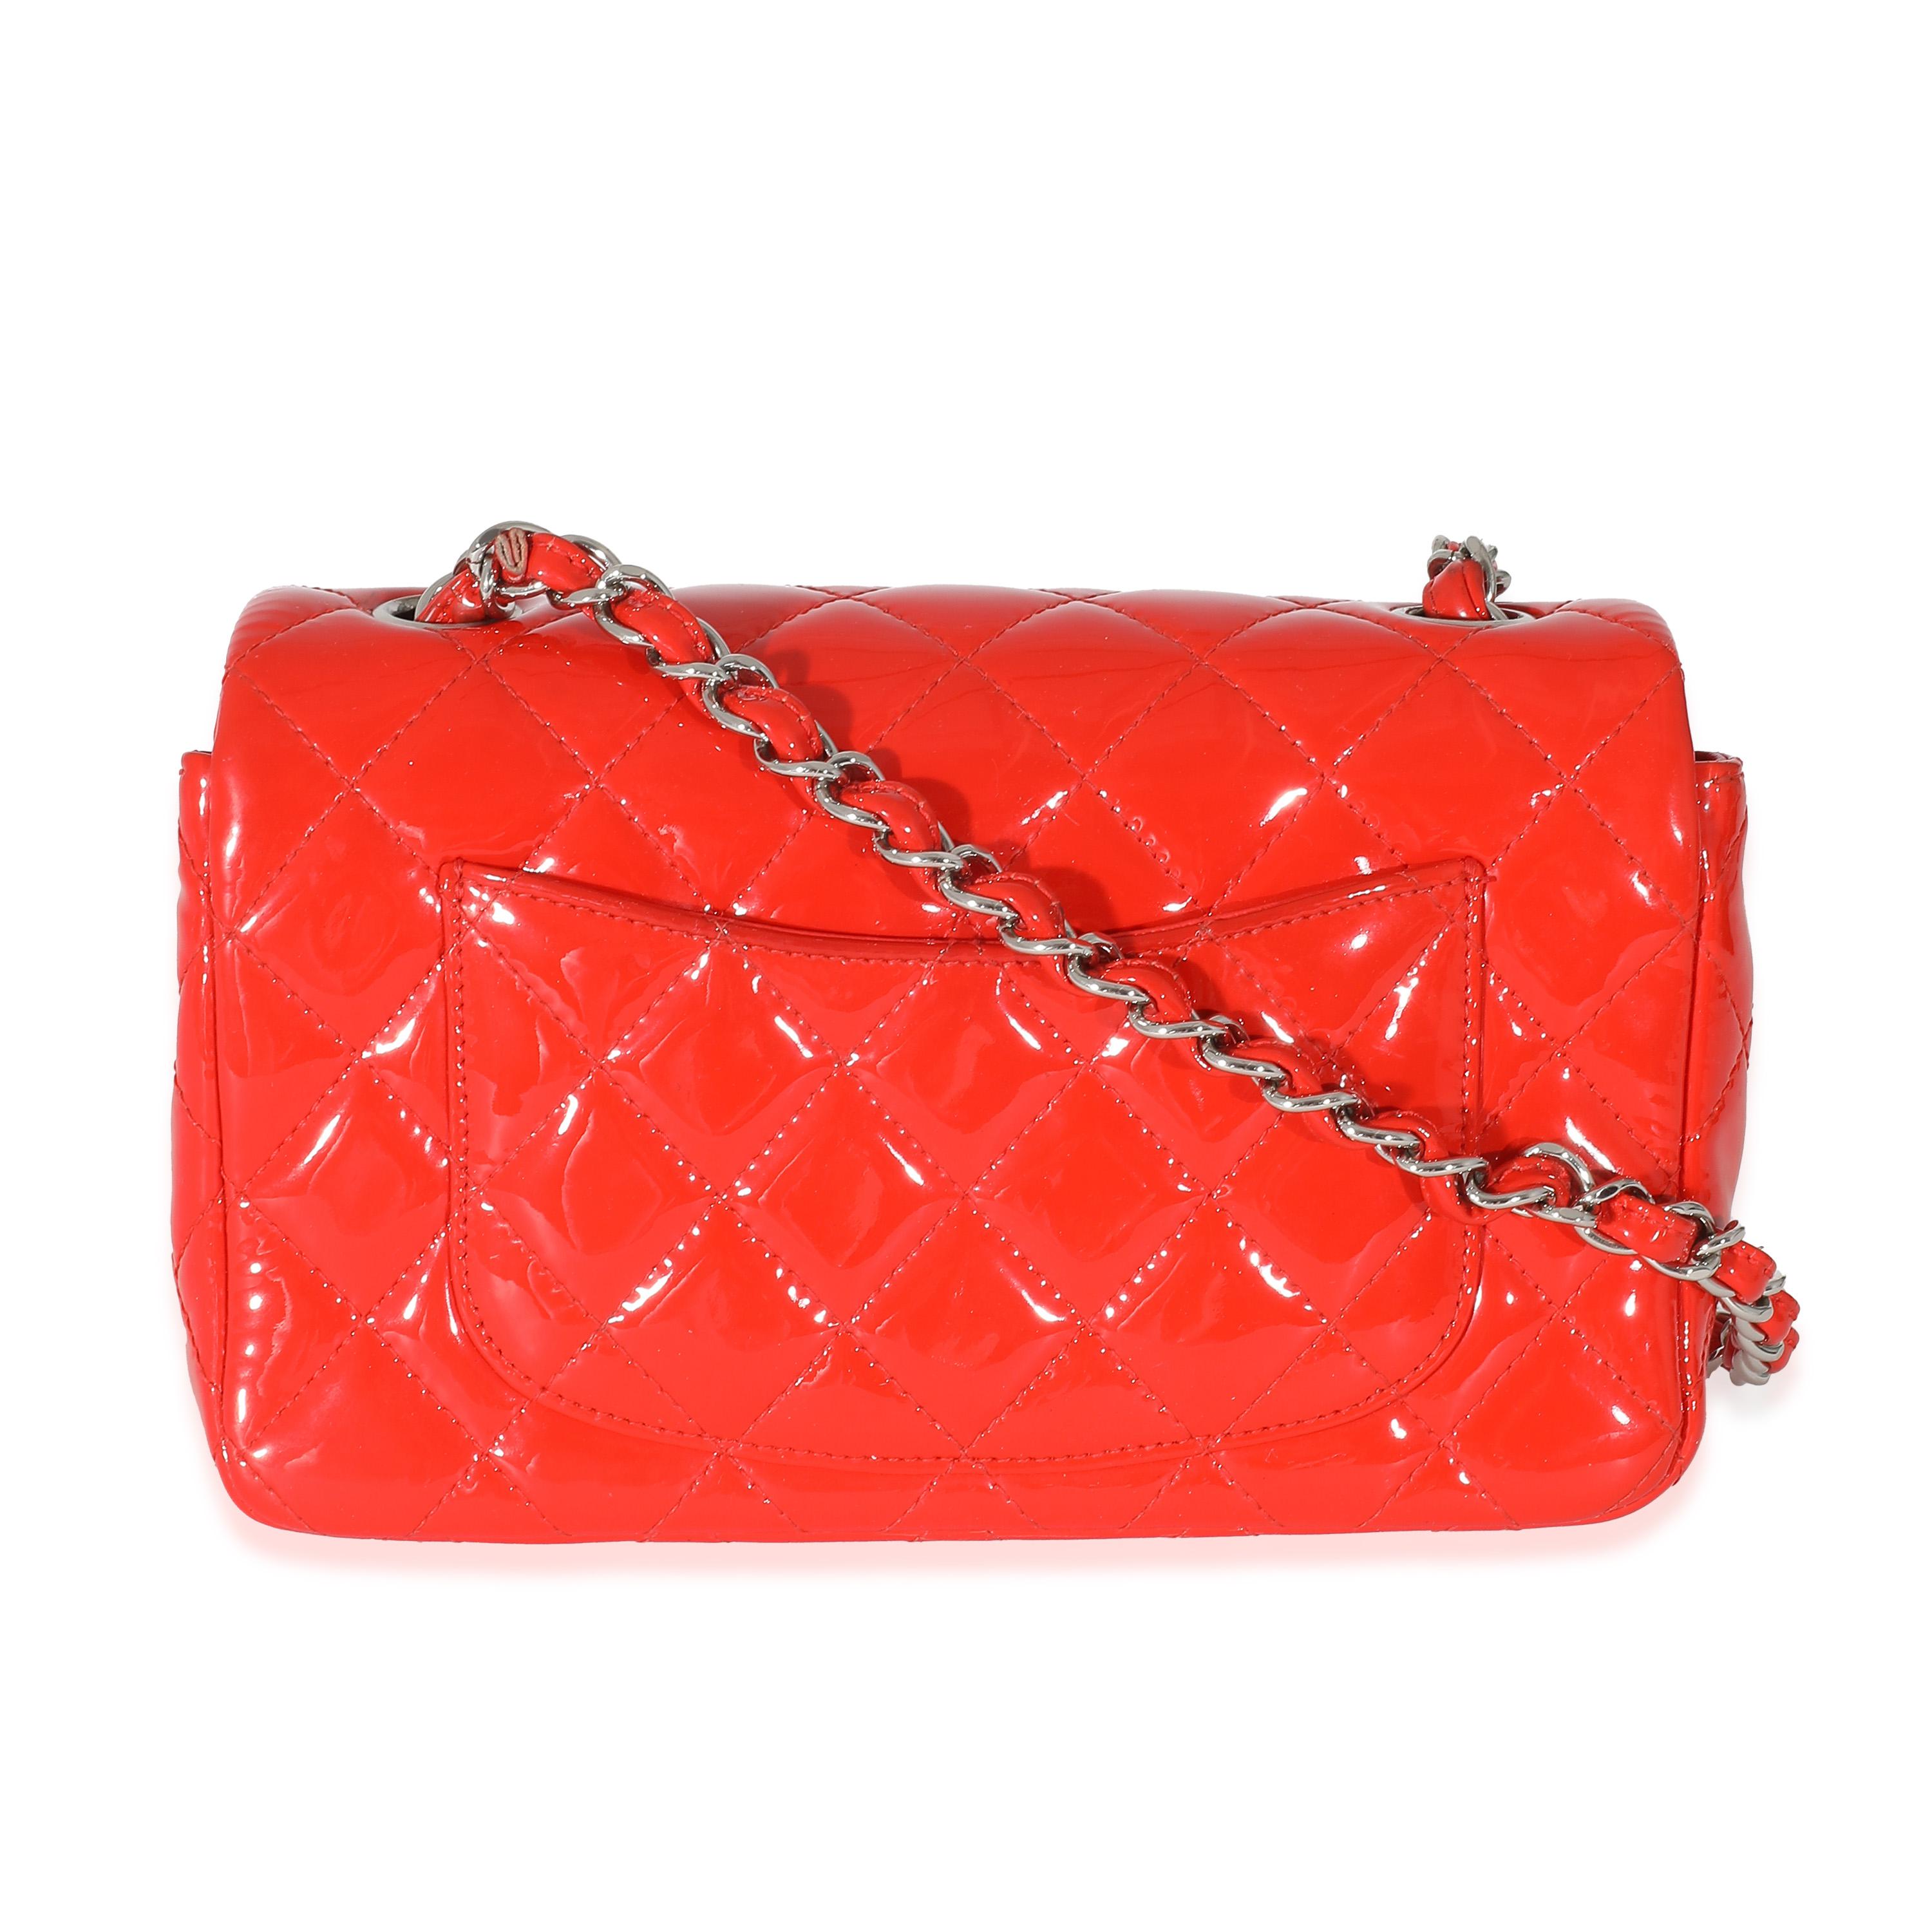 Listing Title: Chanel Red Quilted Patent Mini Rectangular Flap Bag
SKU: 133423
Condition: Pre-owned 
Condition Description: A timeless classic that never goes out of style, the flap bag from Chanel dates back to 1955 and has seen a number of